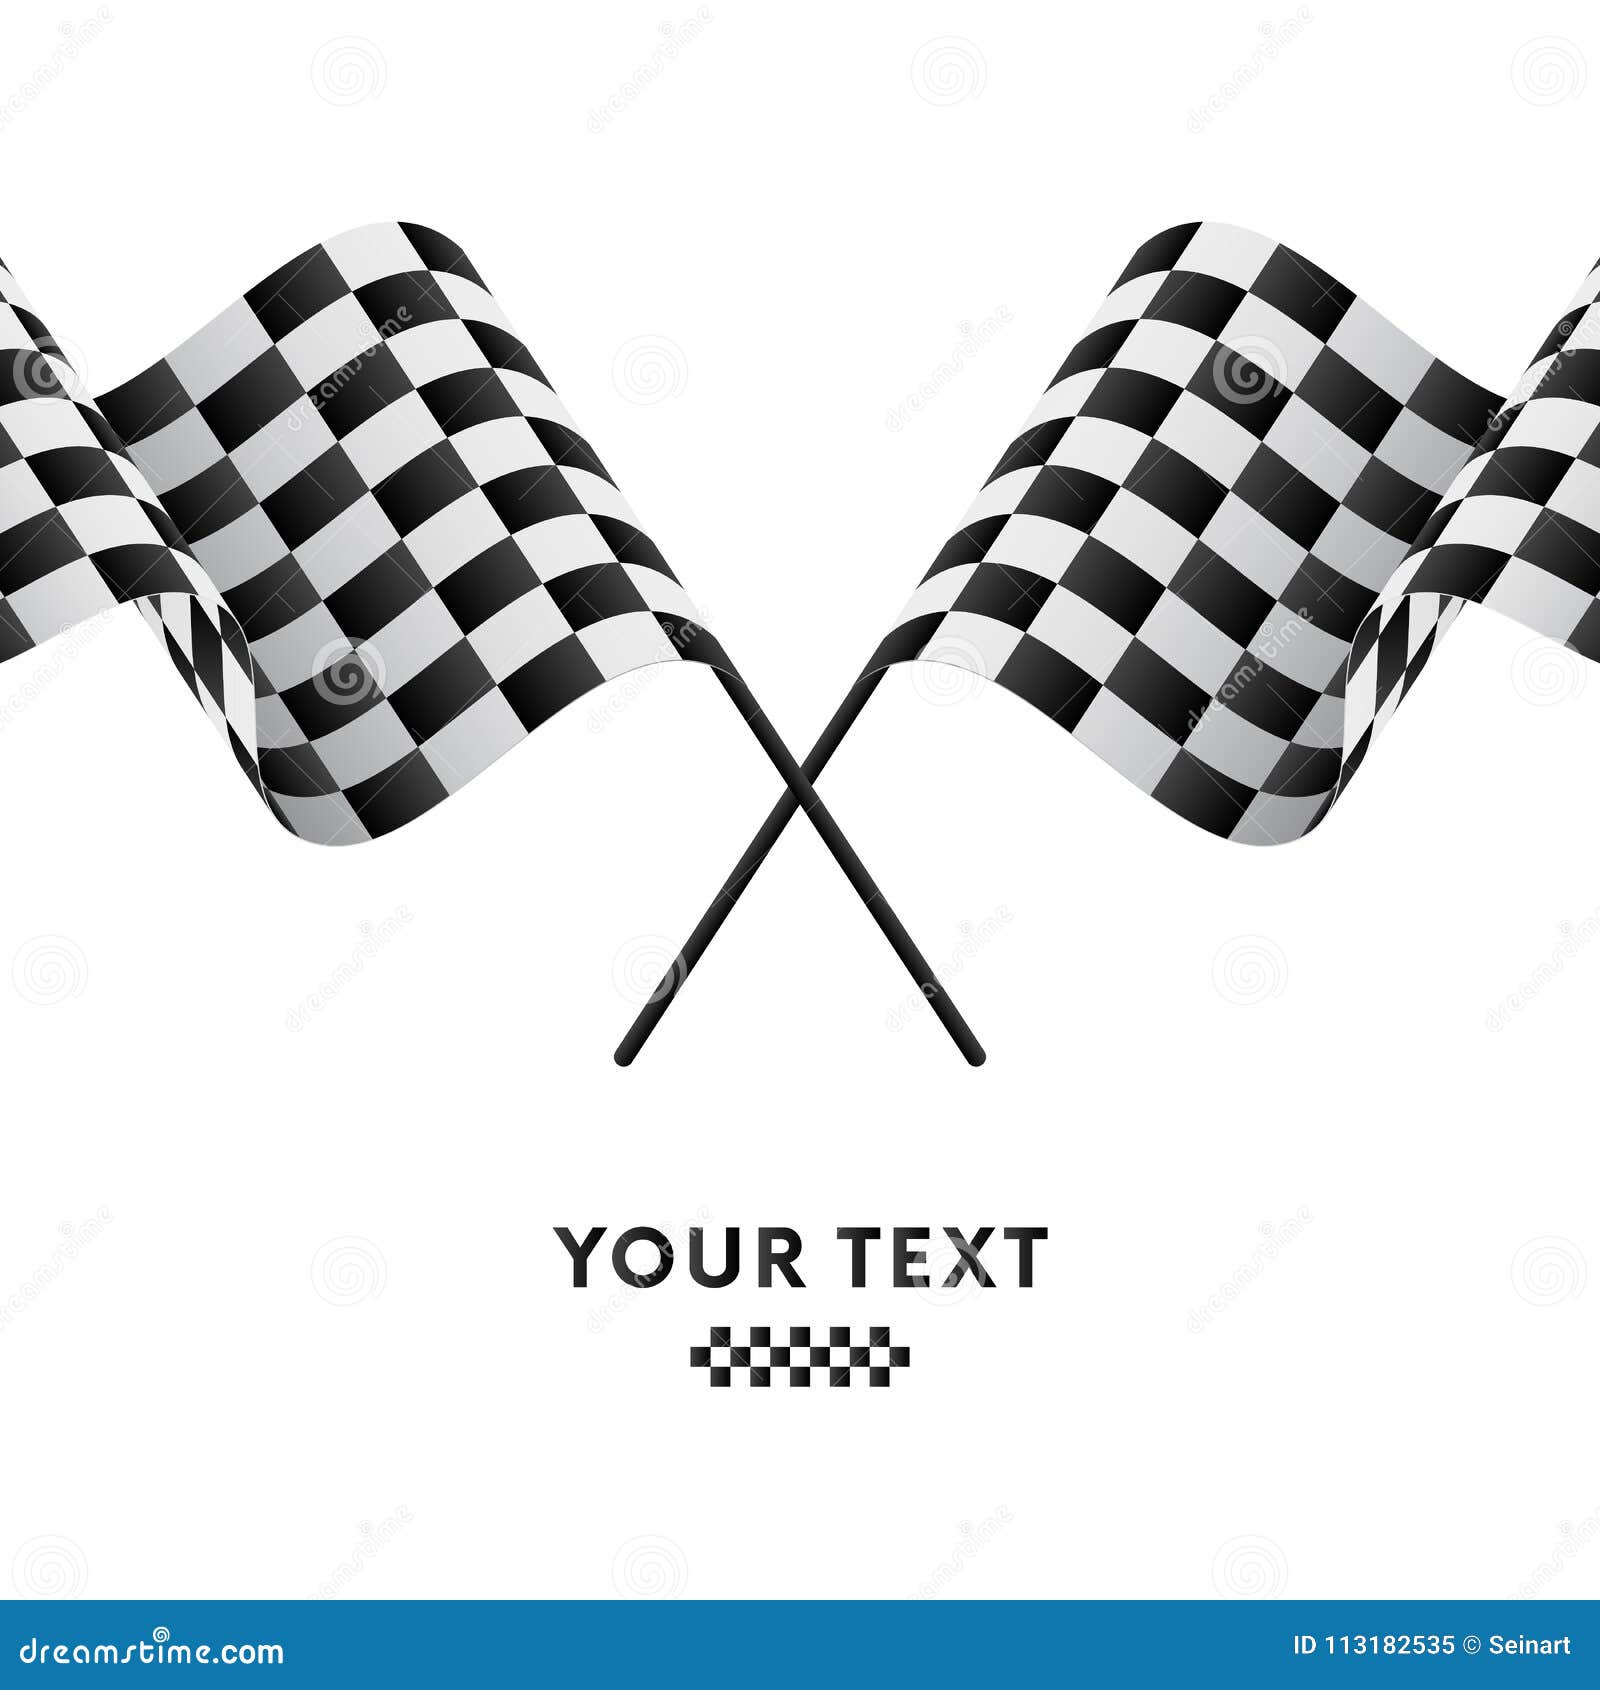 Checkered Flags. Racing Flags. Vector Illustration. Stock Illustration ... Repeating Checkered Flag Background